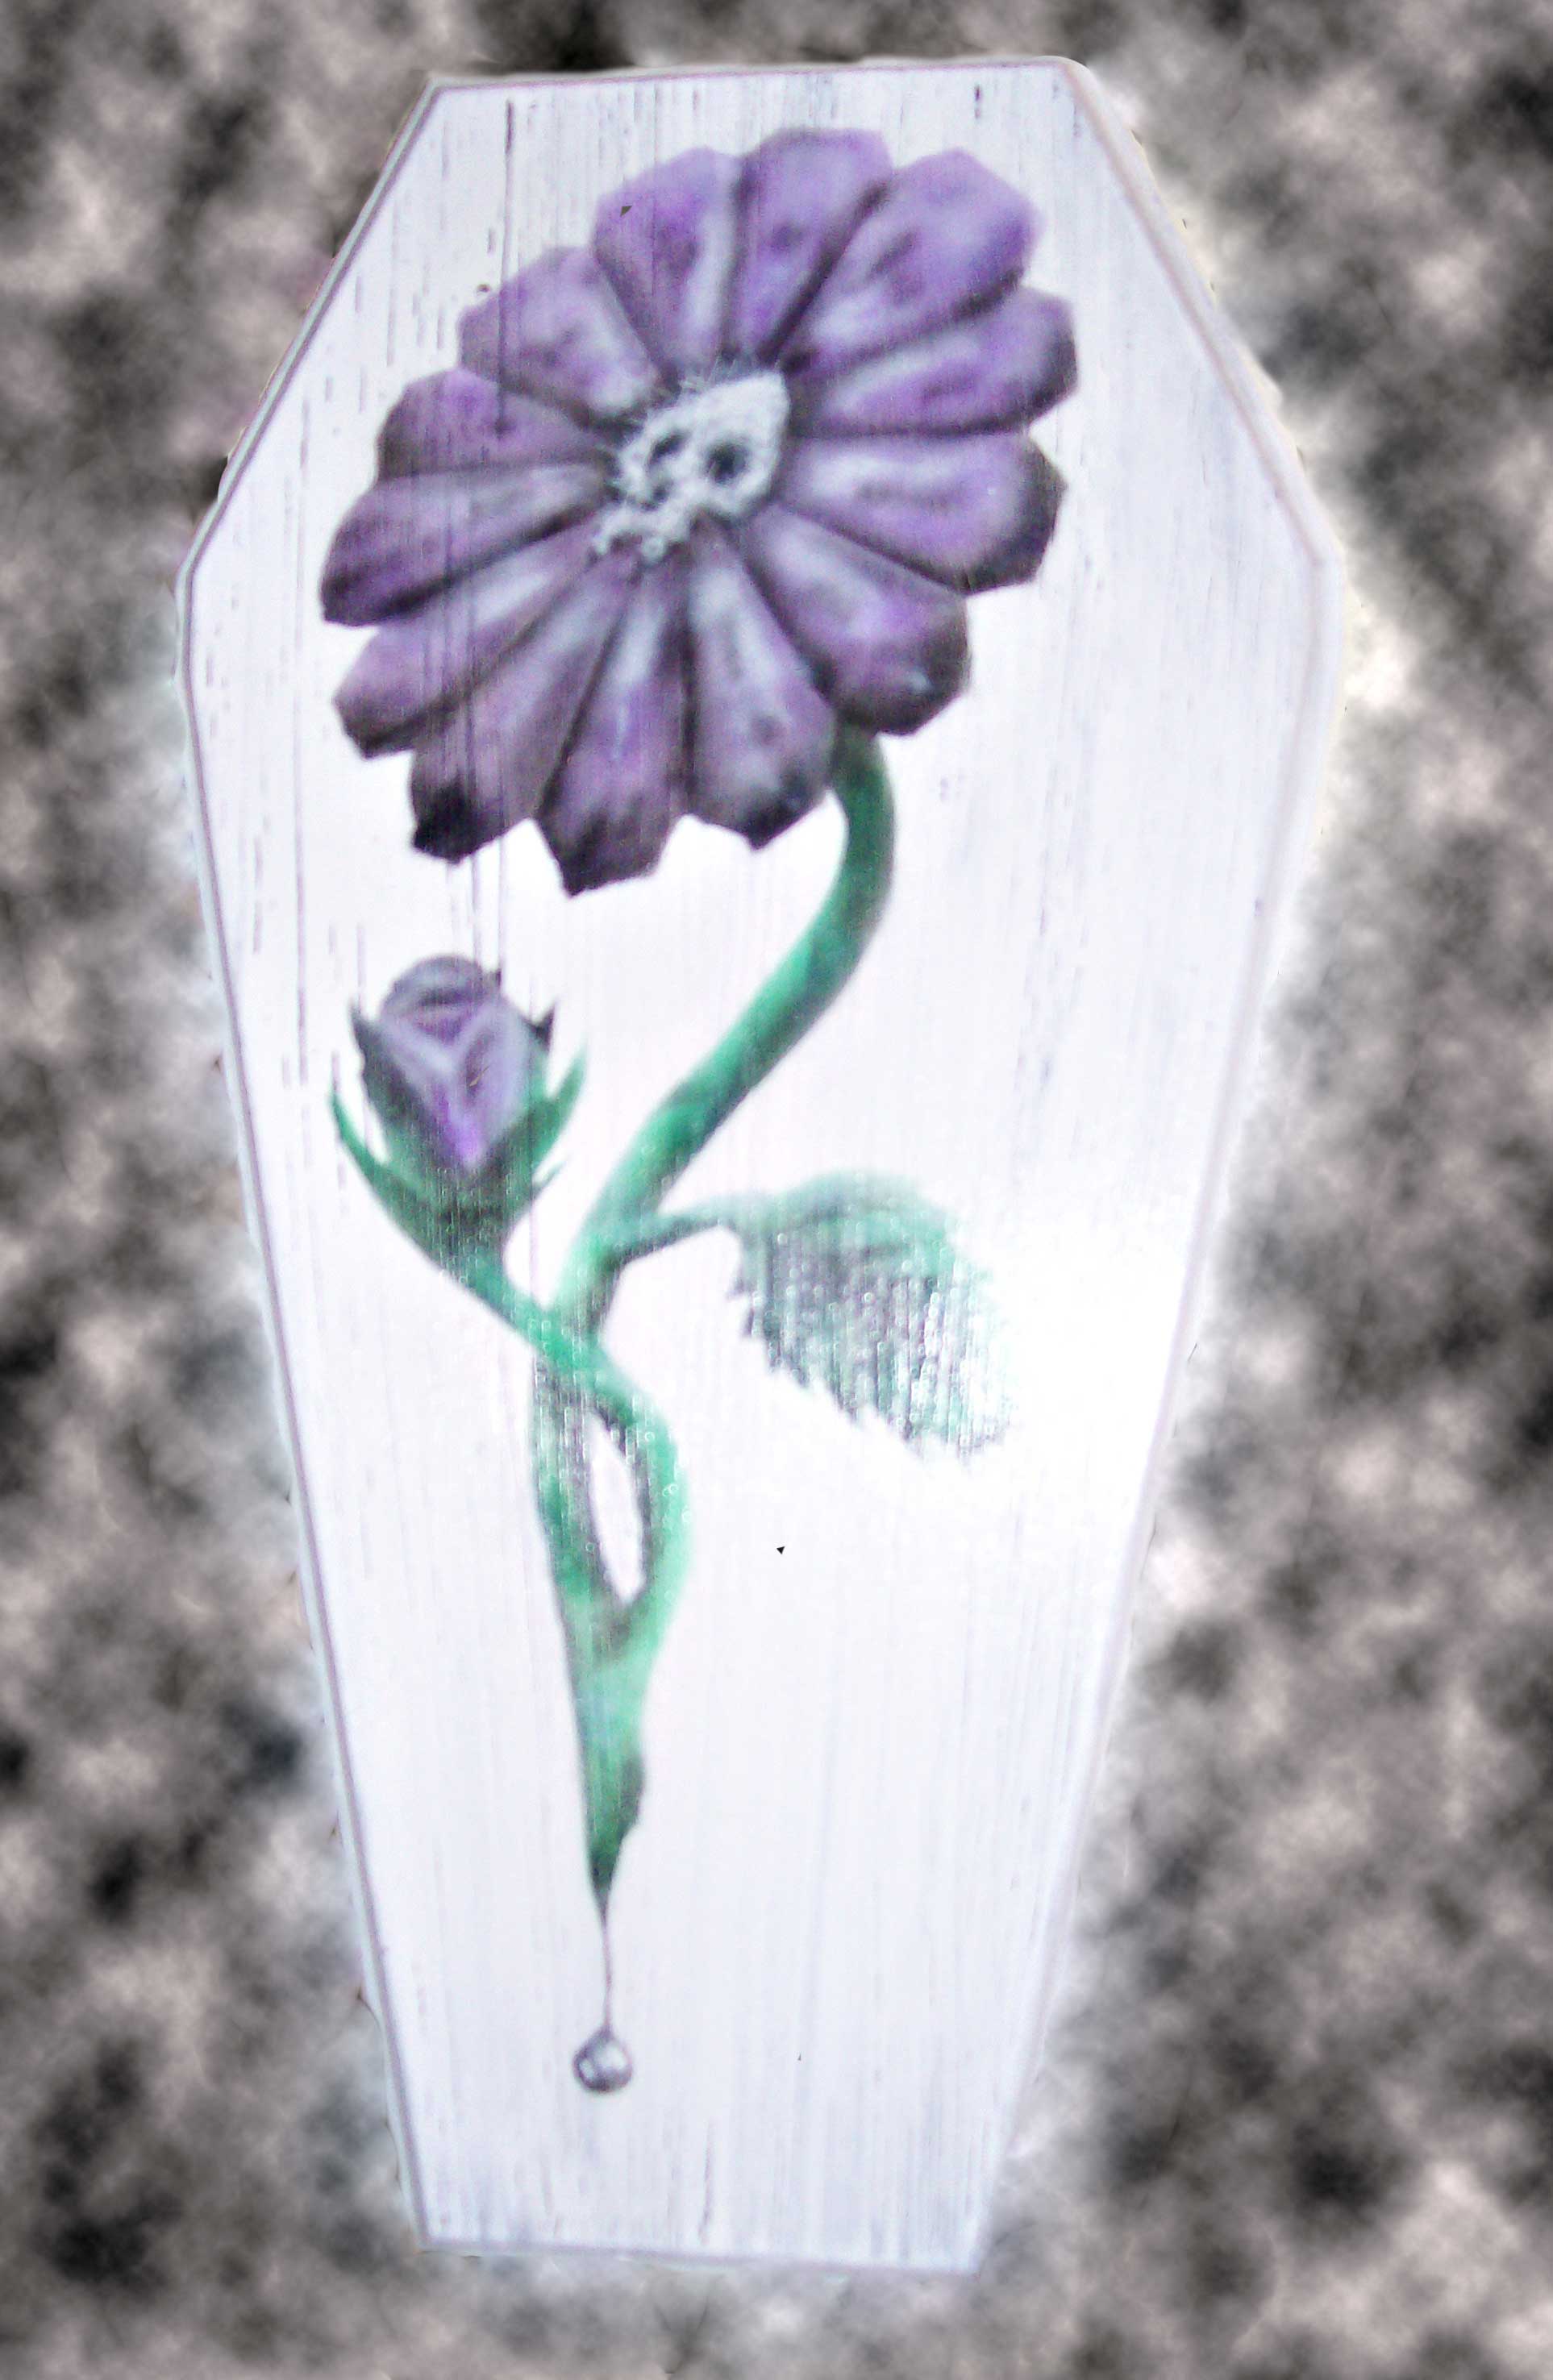 Death Daisy coffin painting